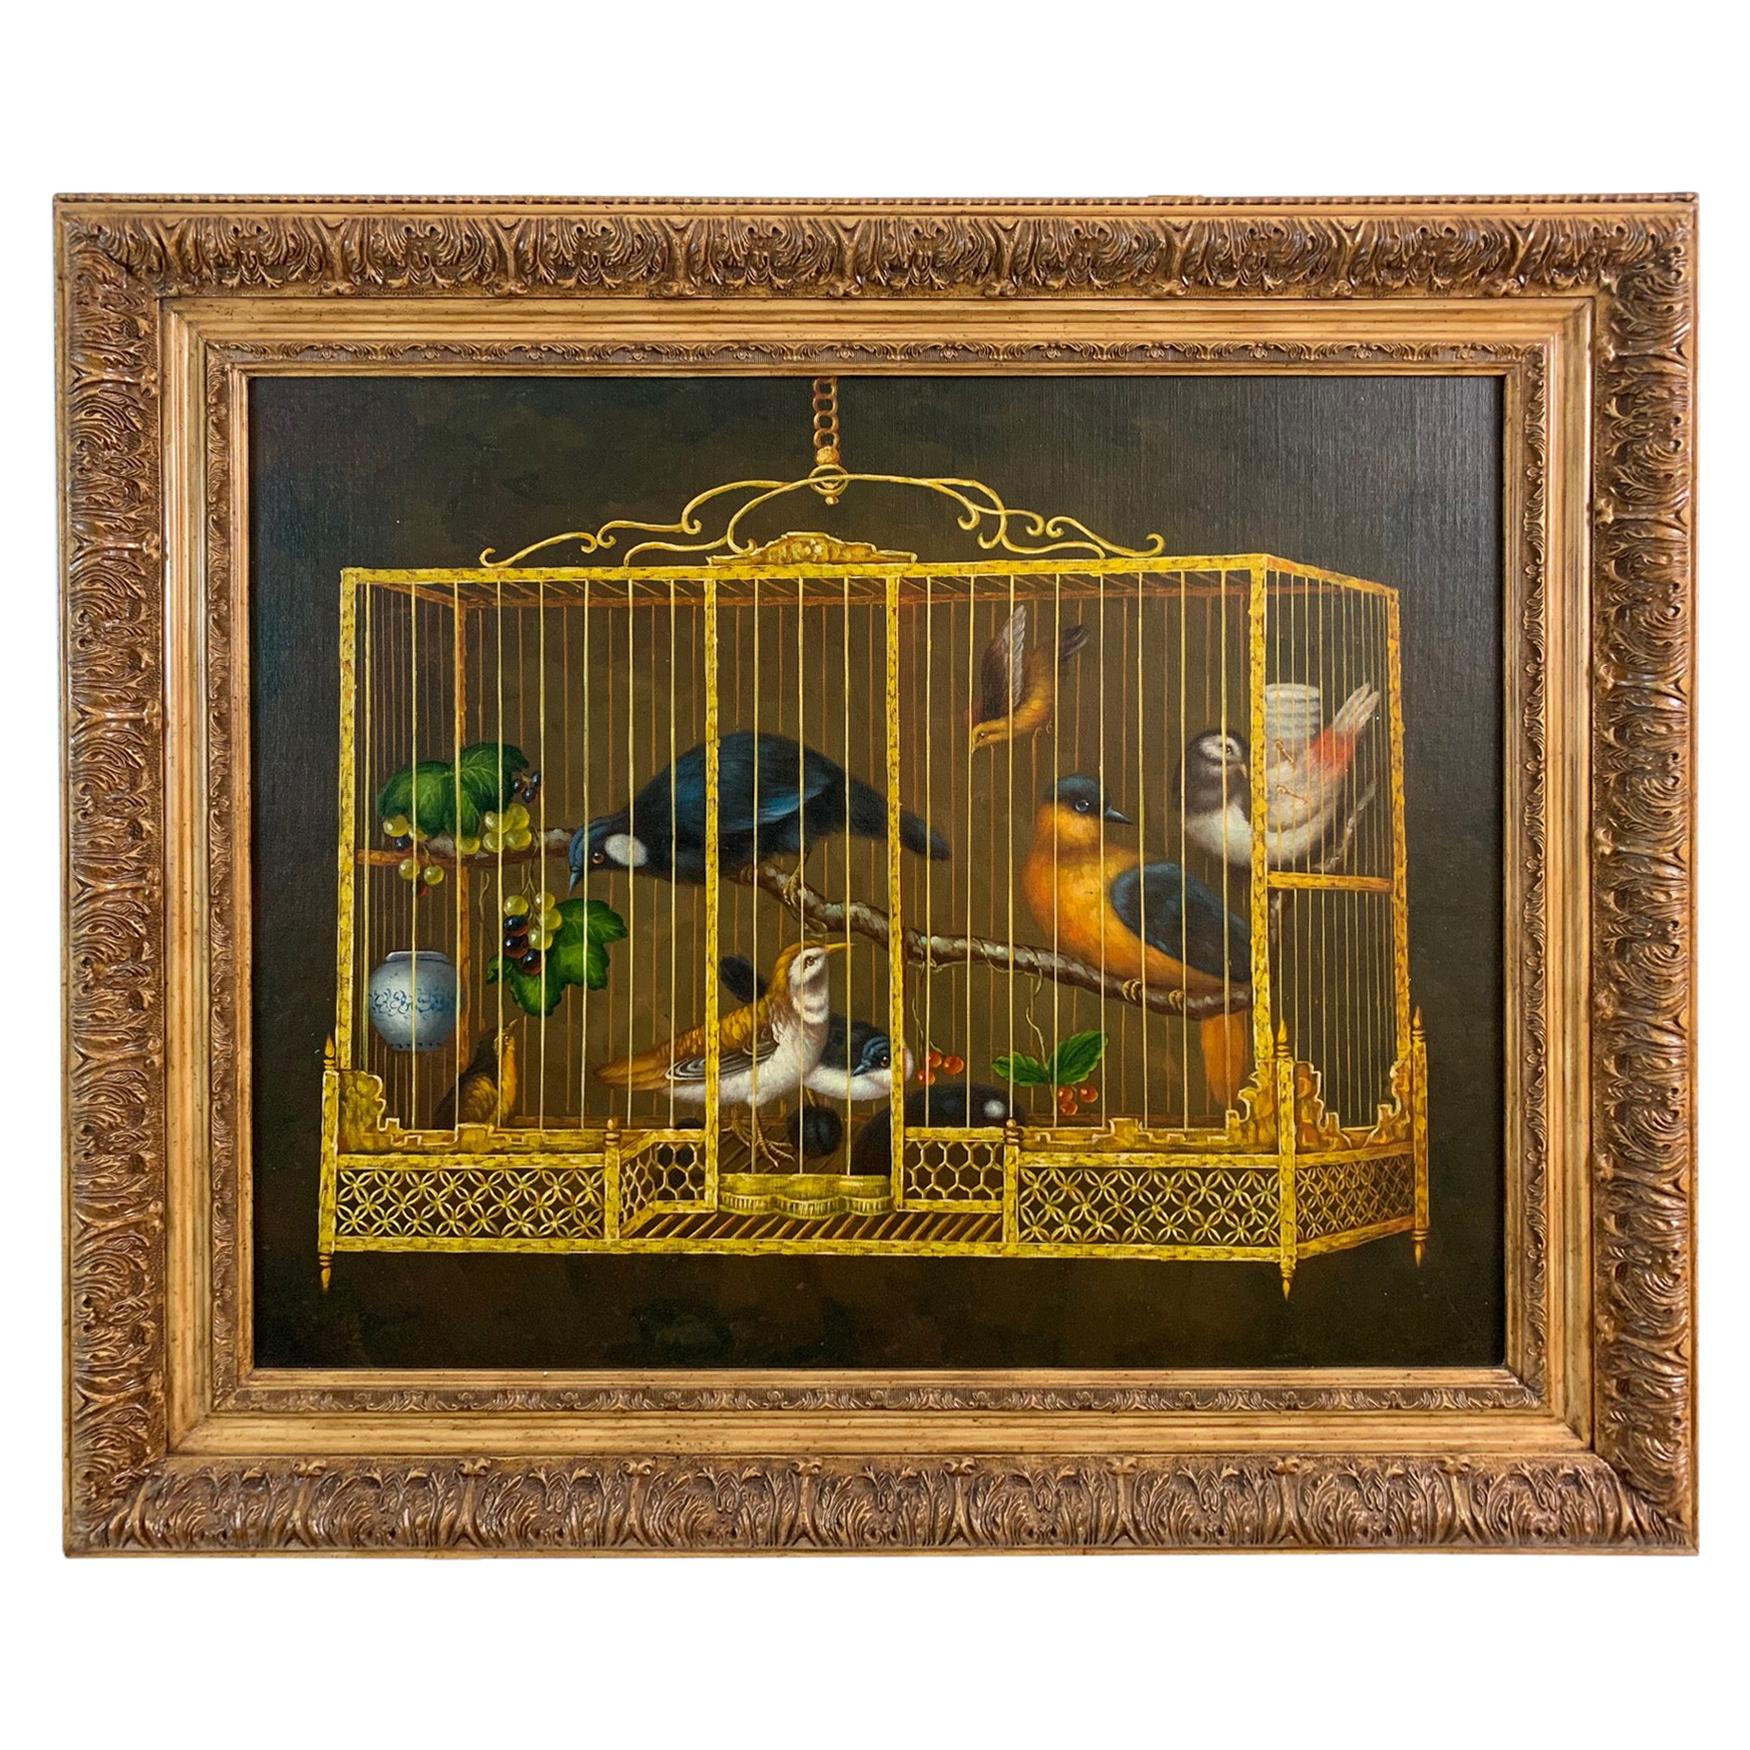 Maitland Smith Decorative Painting of Birds in a Cage